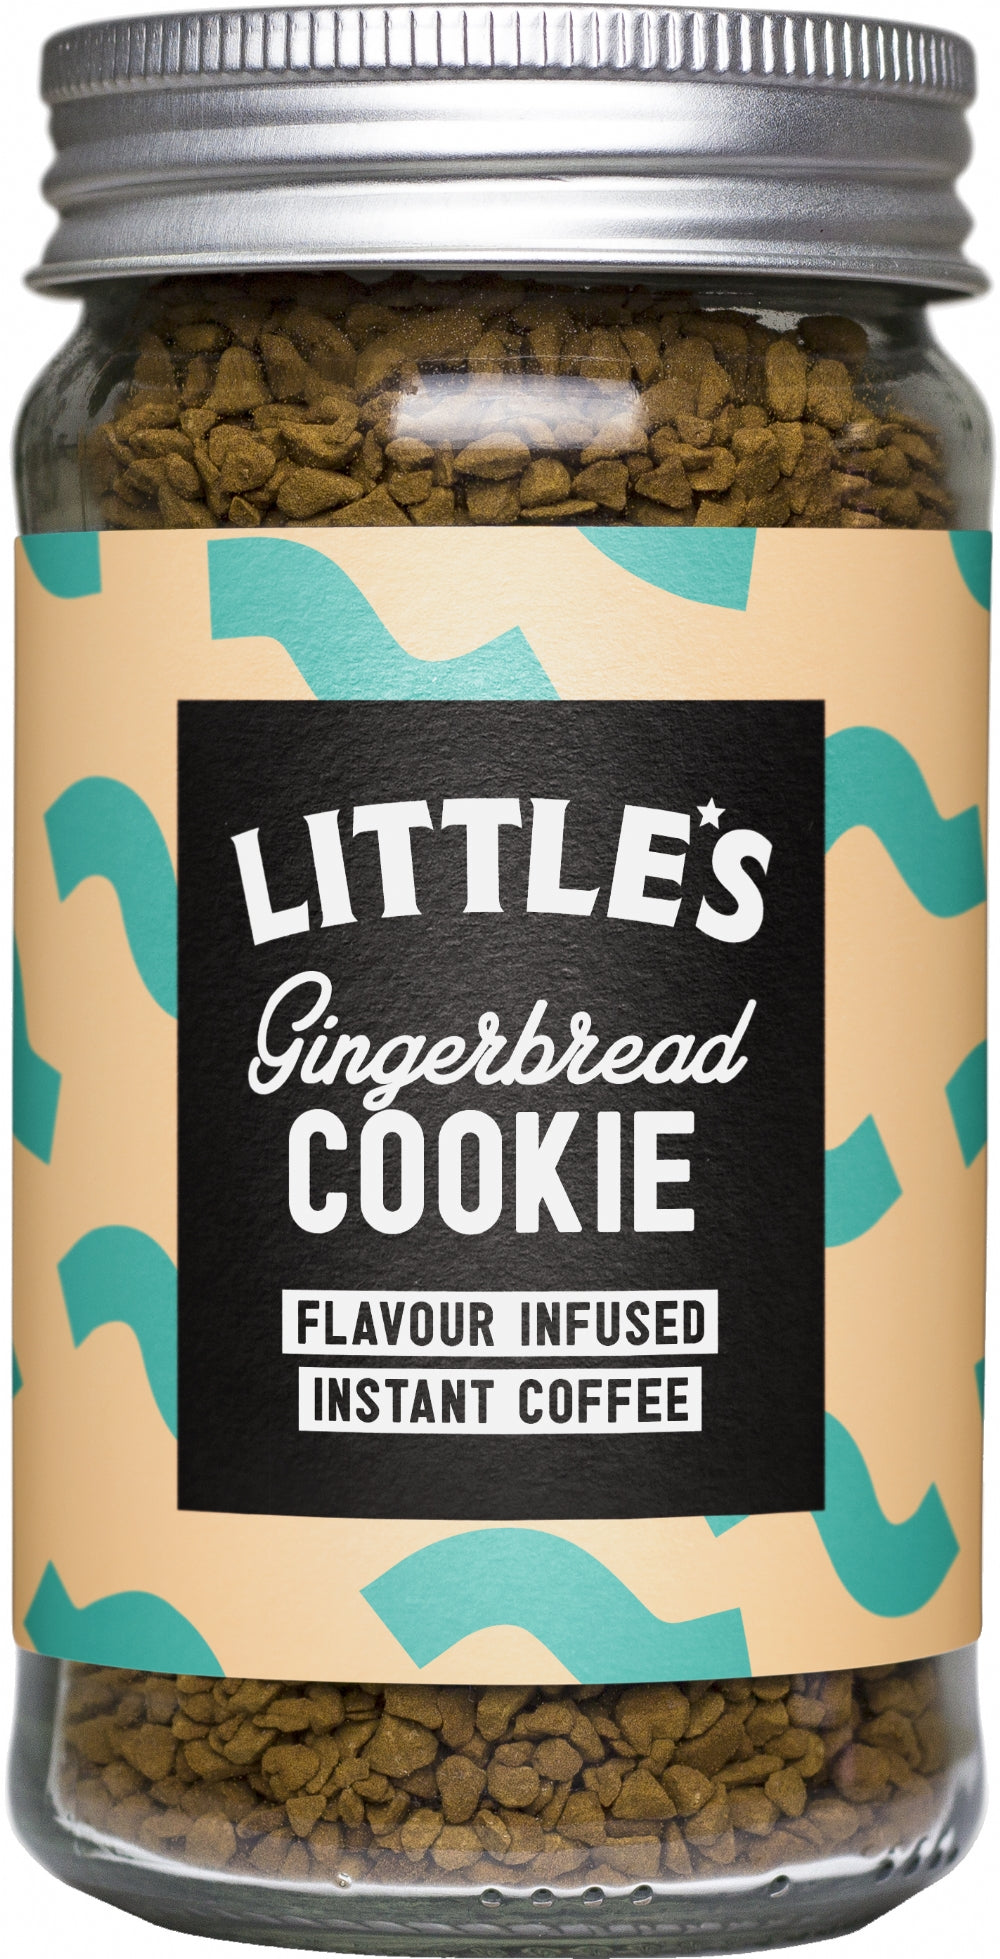 Little's Gingerbread Cookie Flavour Instant Coffee